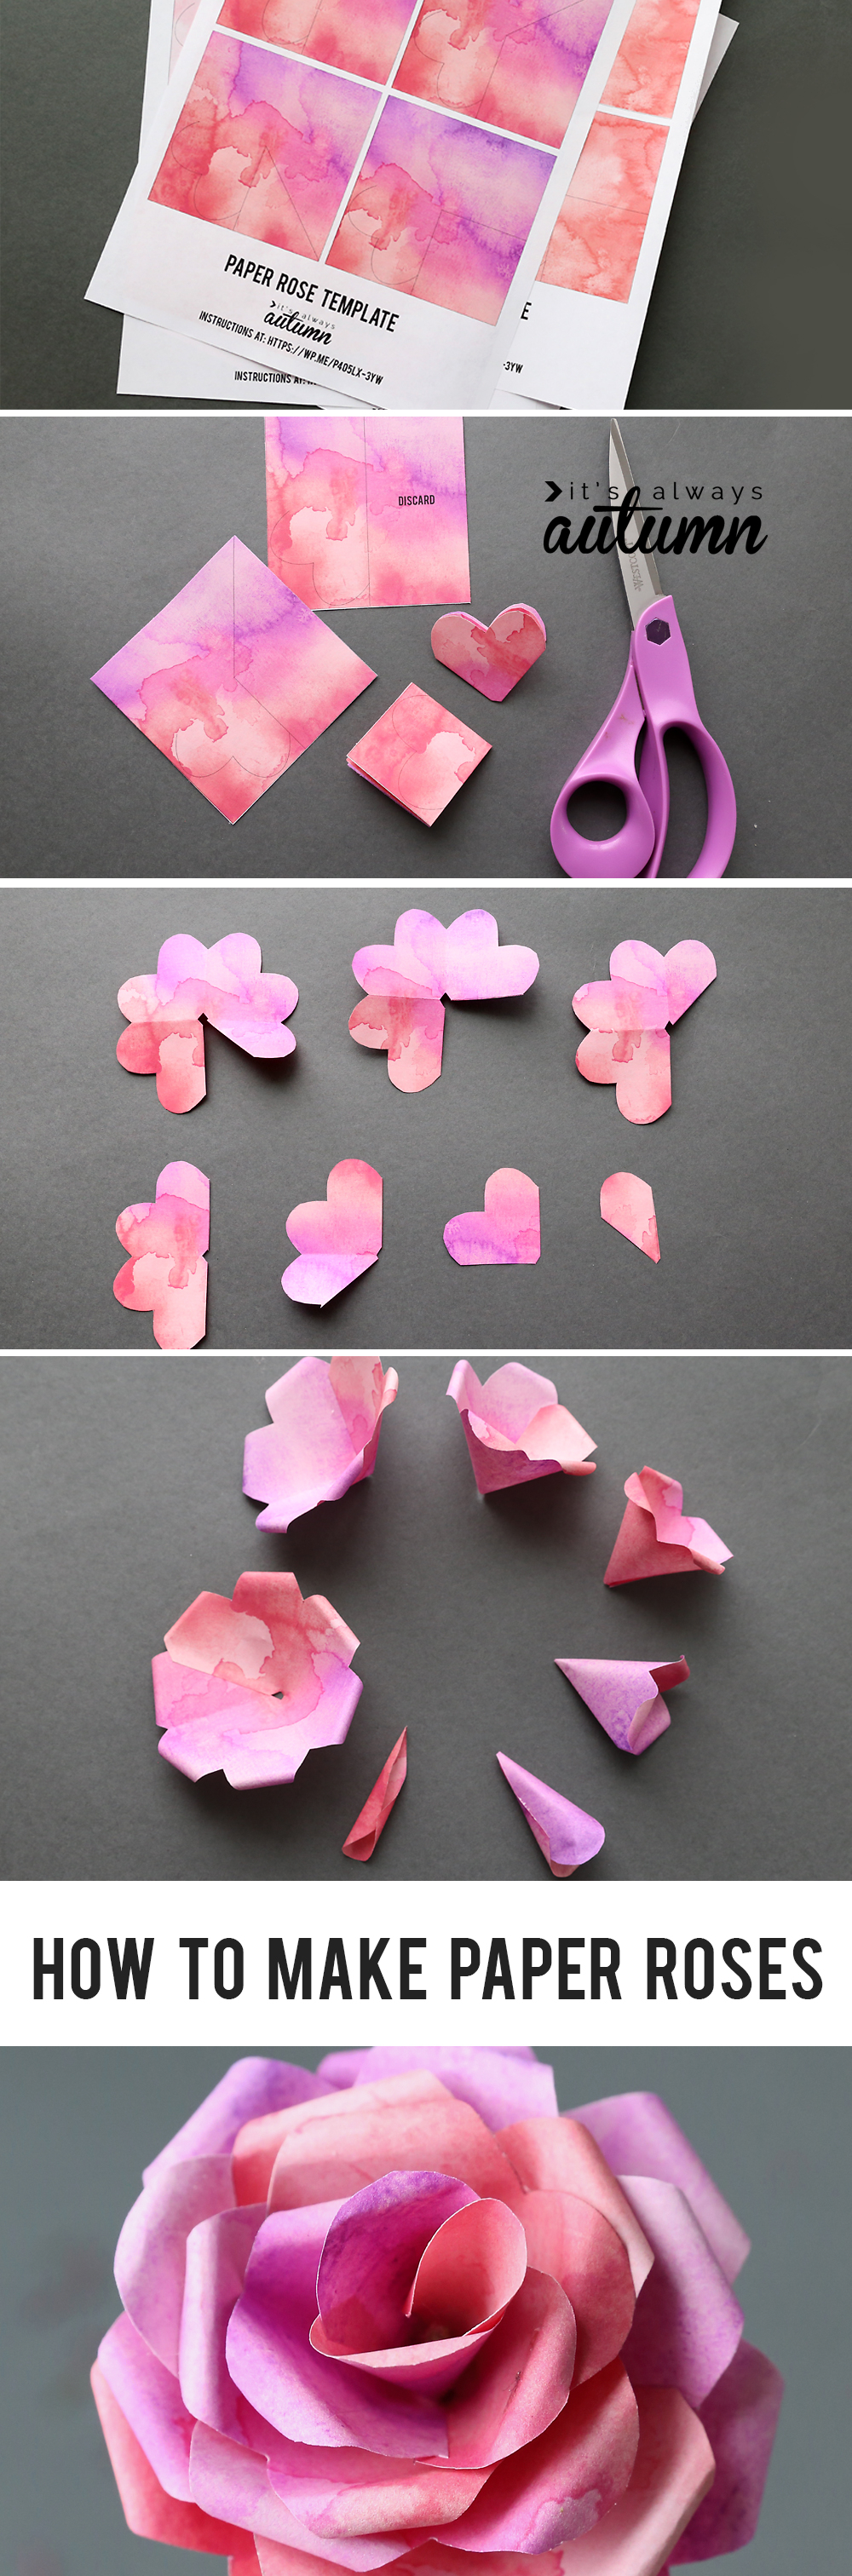 How To Do A Origami Flower Make Gorgeous Paper Roses With This Free Paper Rose Template Its